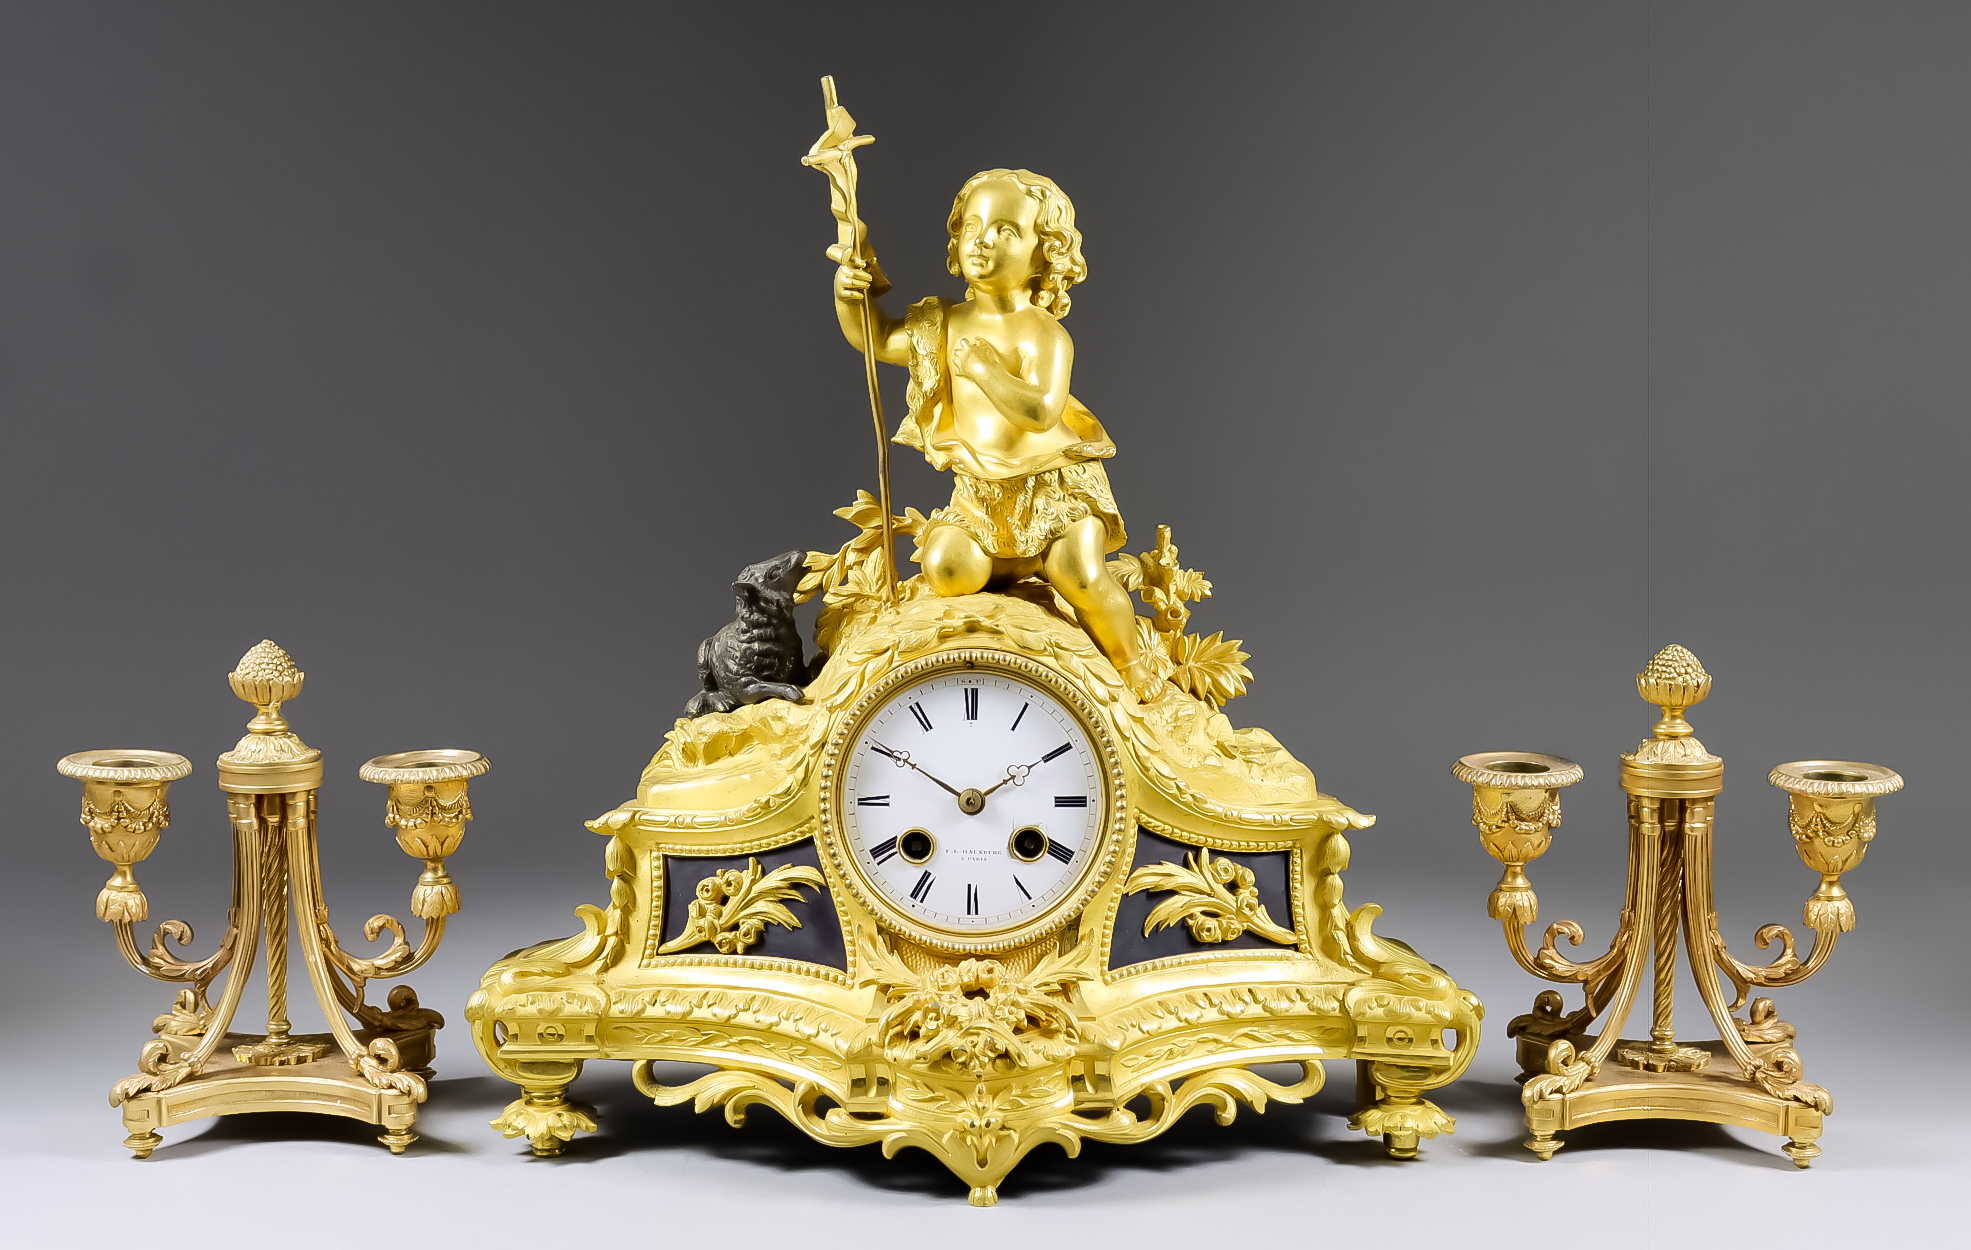 A 19th Century French Gilt Brass and Bronzed Mantel Clock, by F. L. Hausburg of Paris, No. 5404